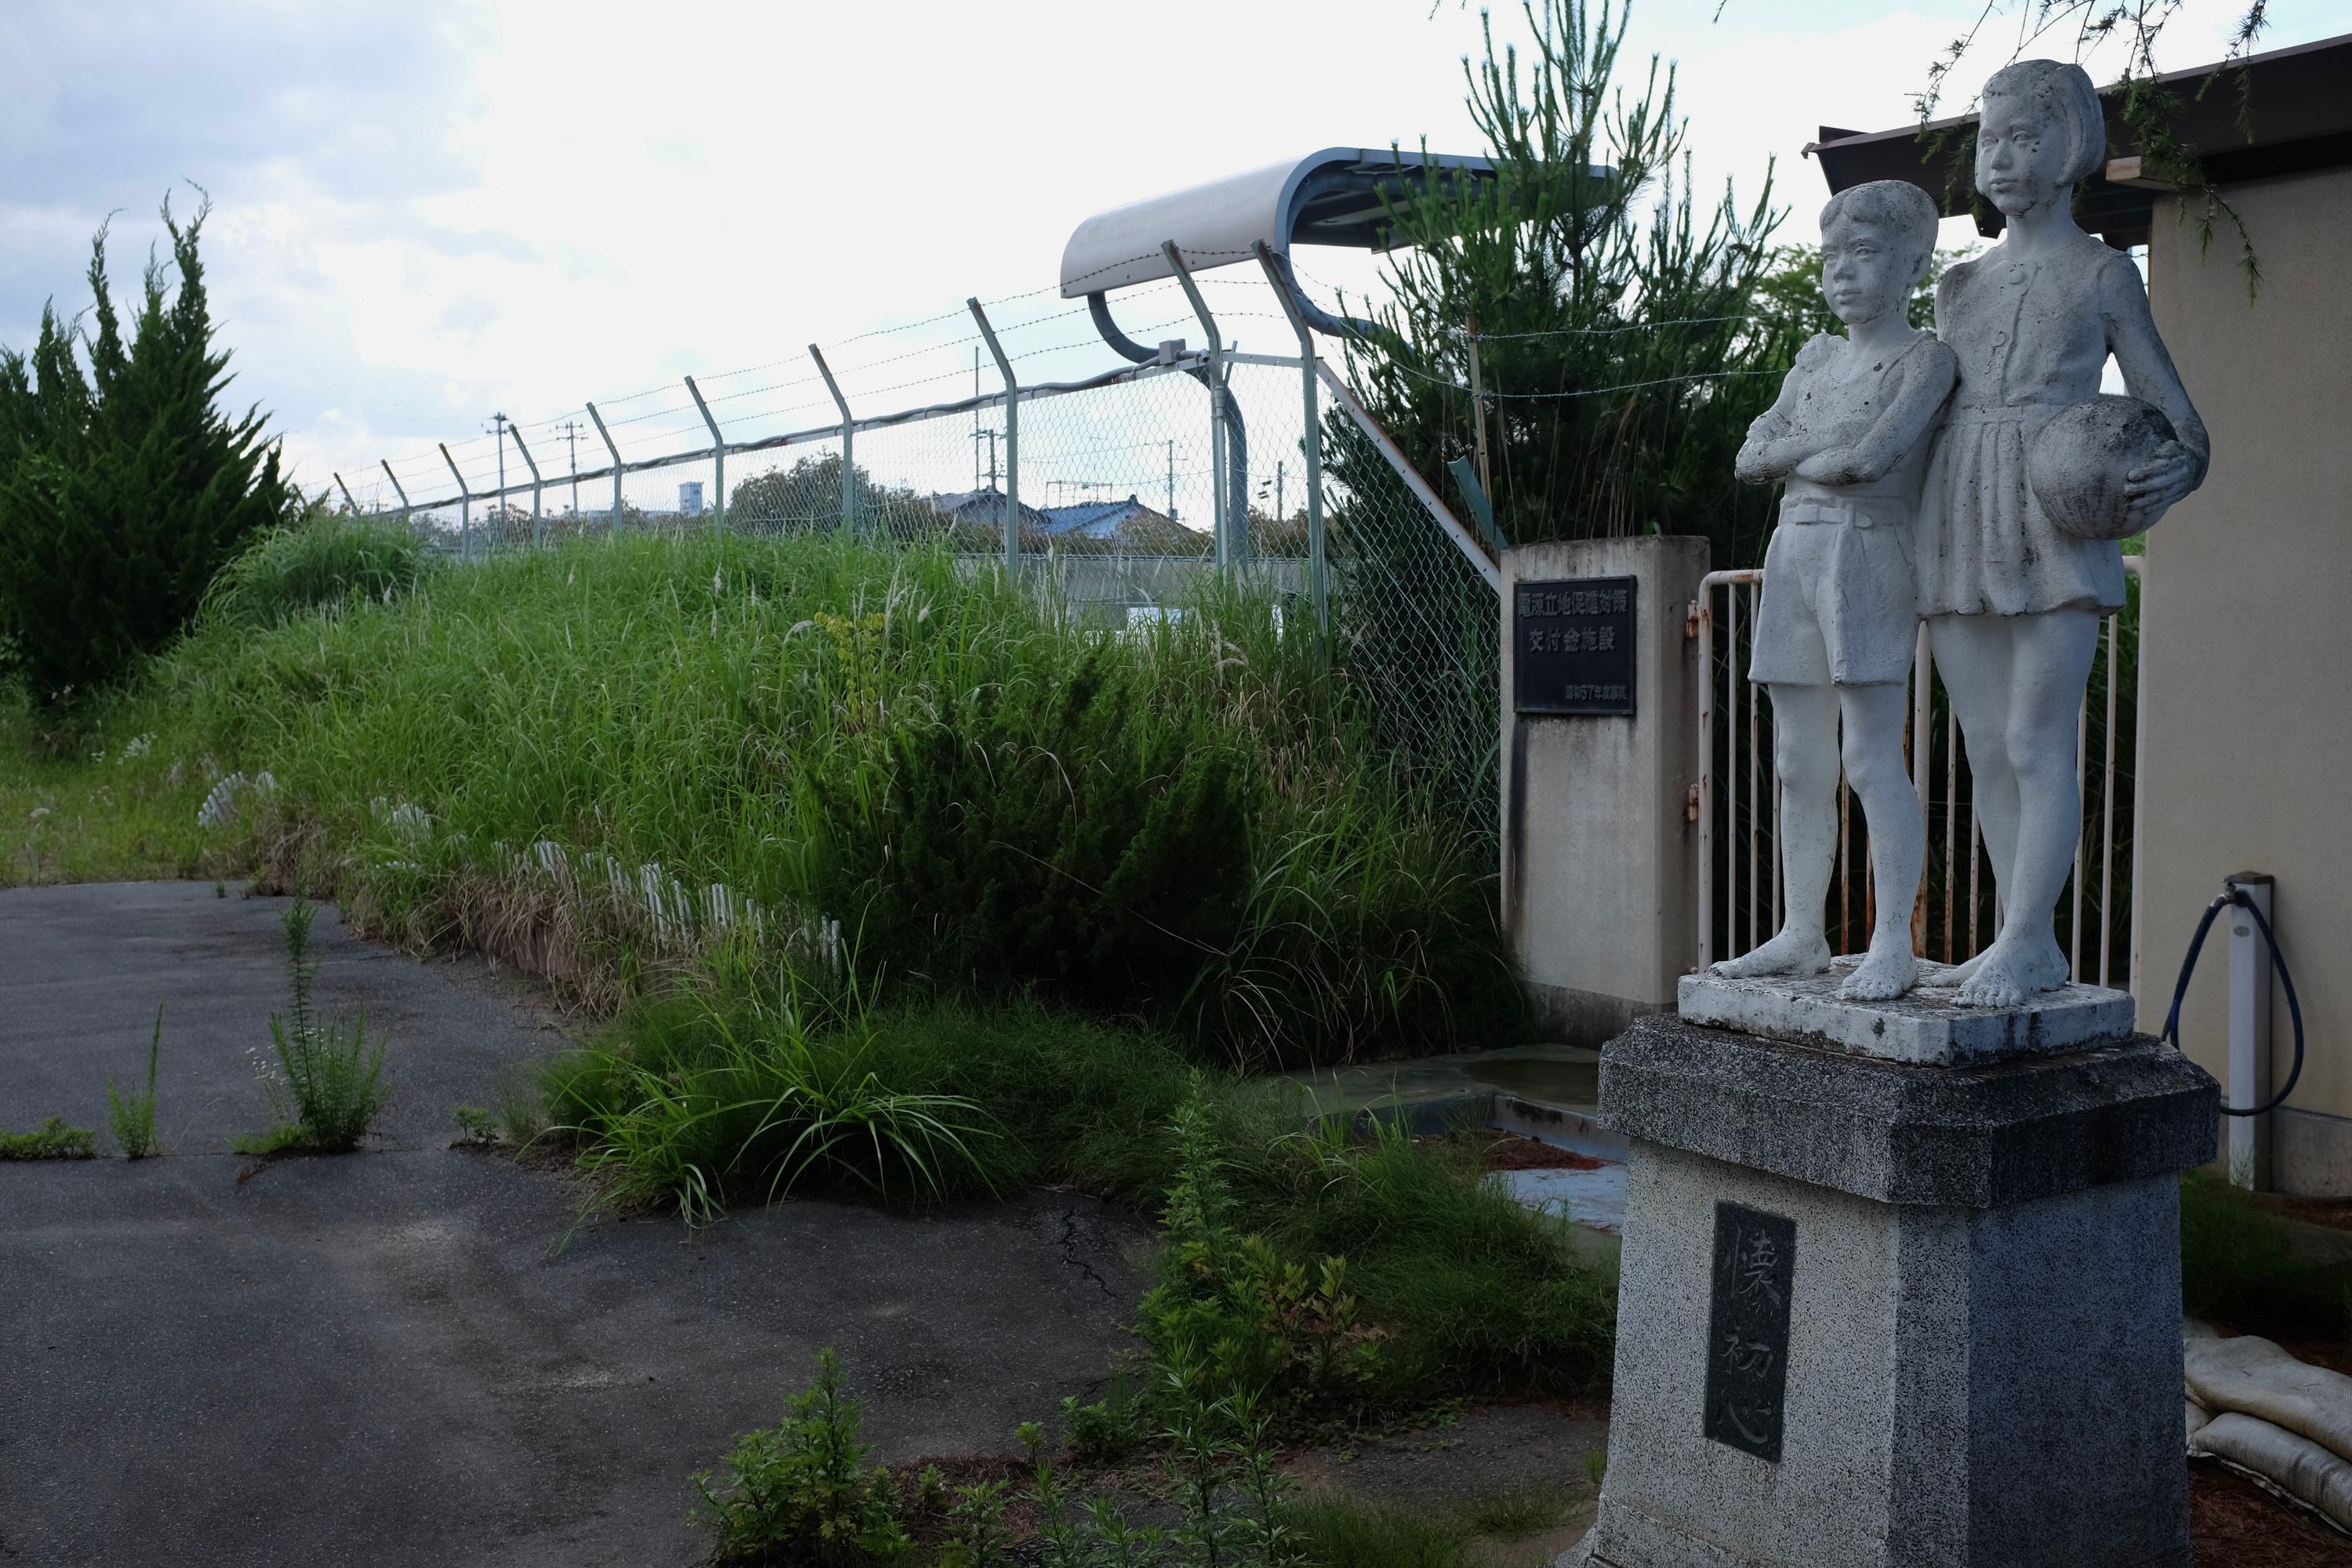 A statue of a schoolgirl and a younger schoolboy in an school yard overgrown with weeds.